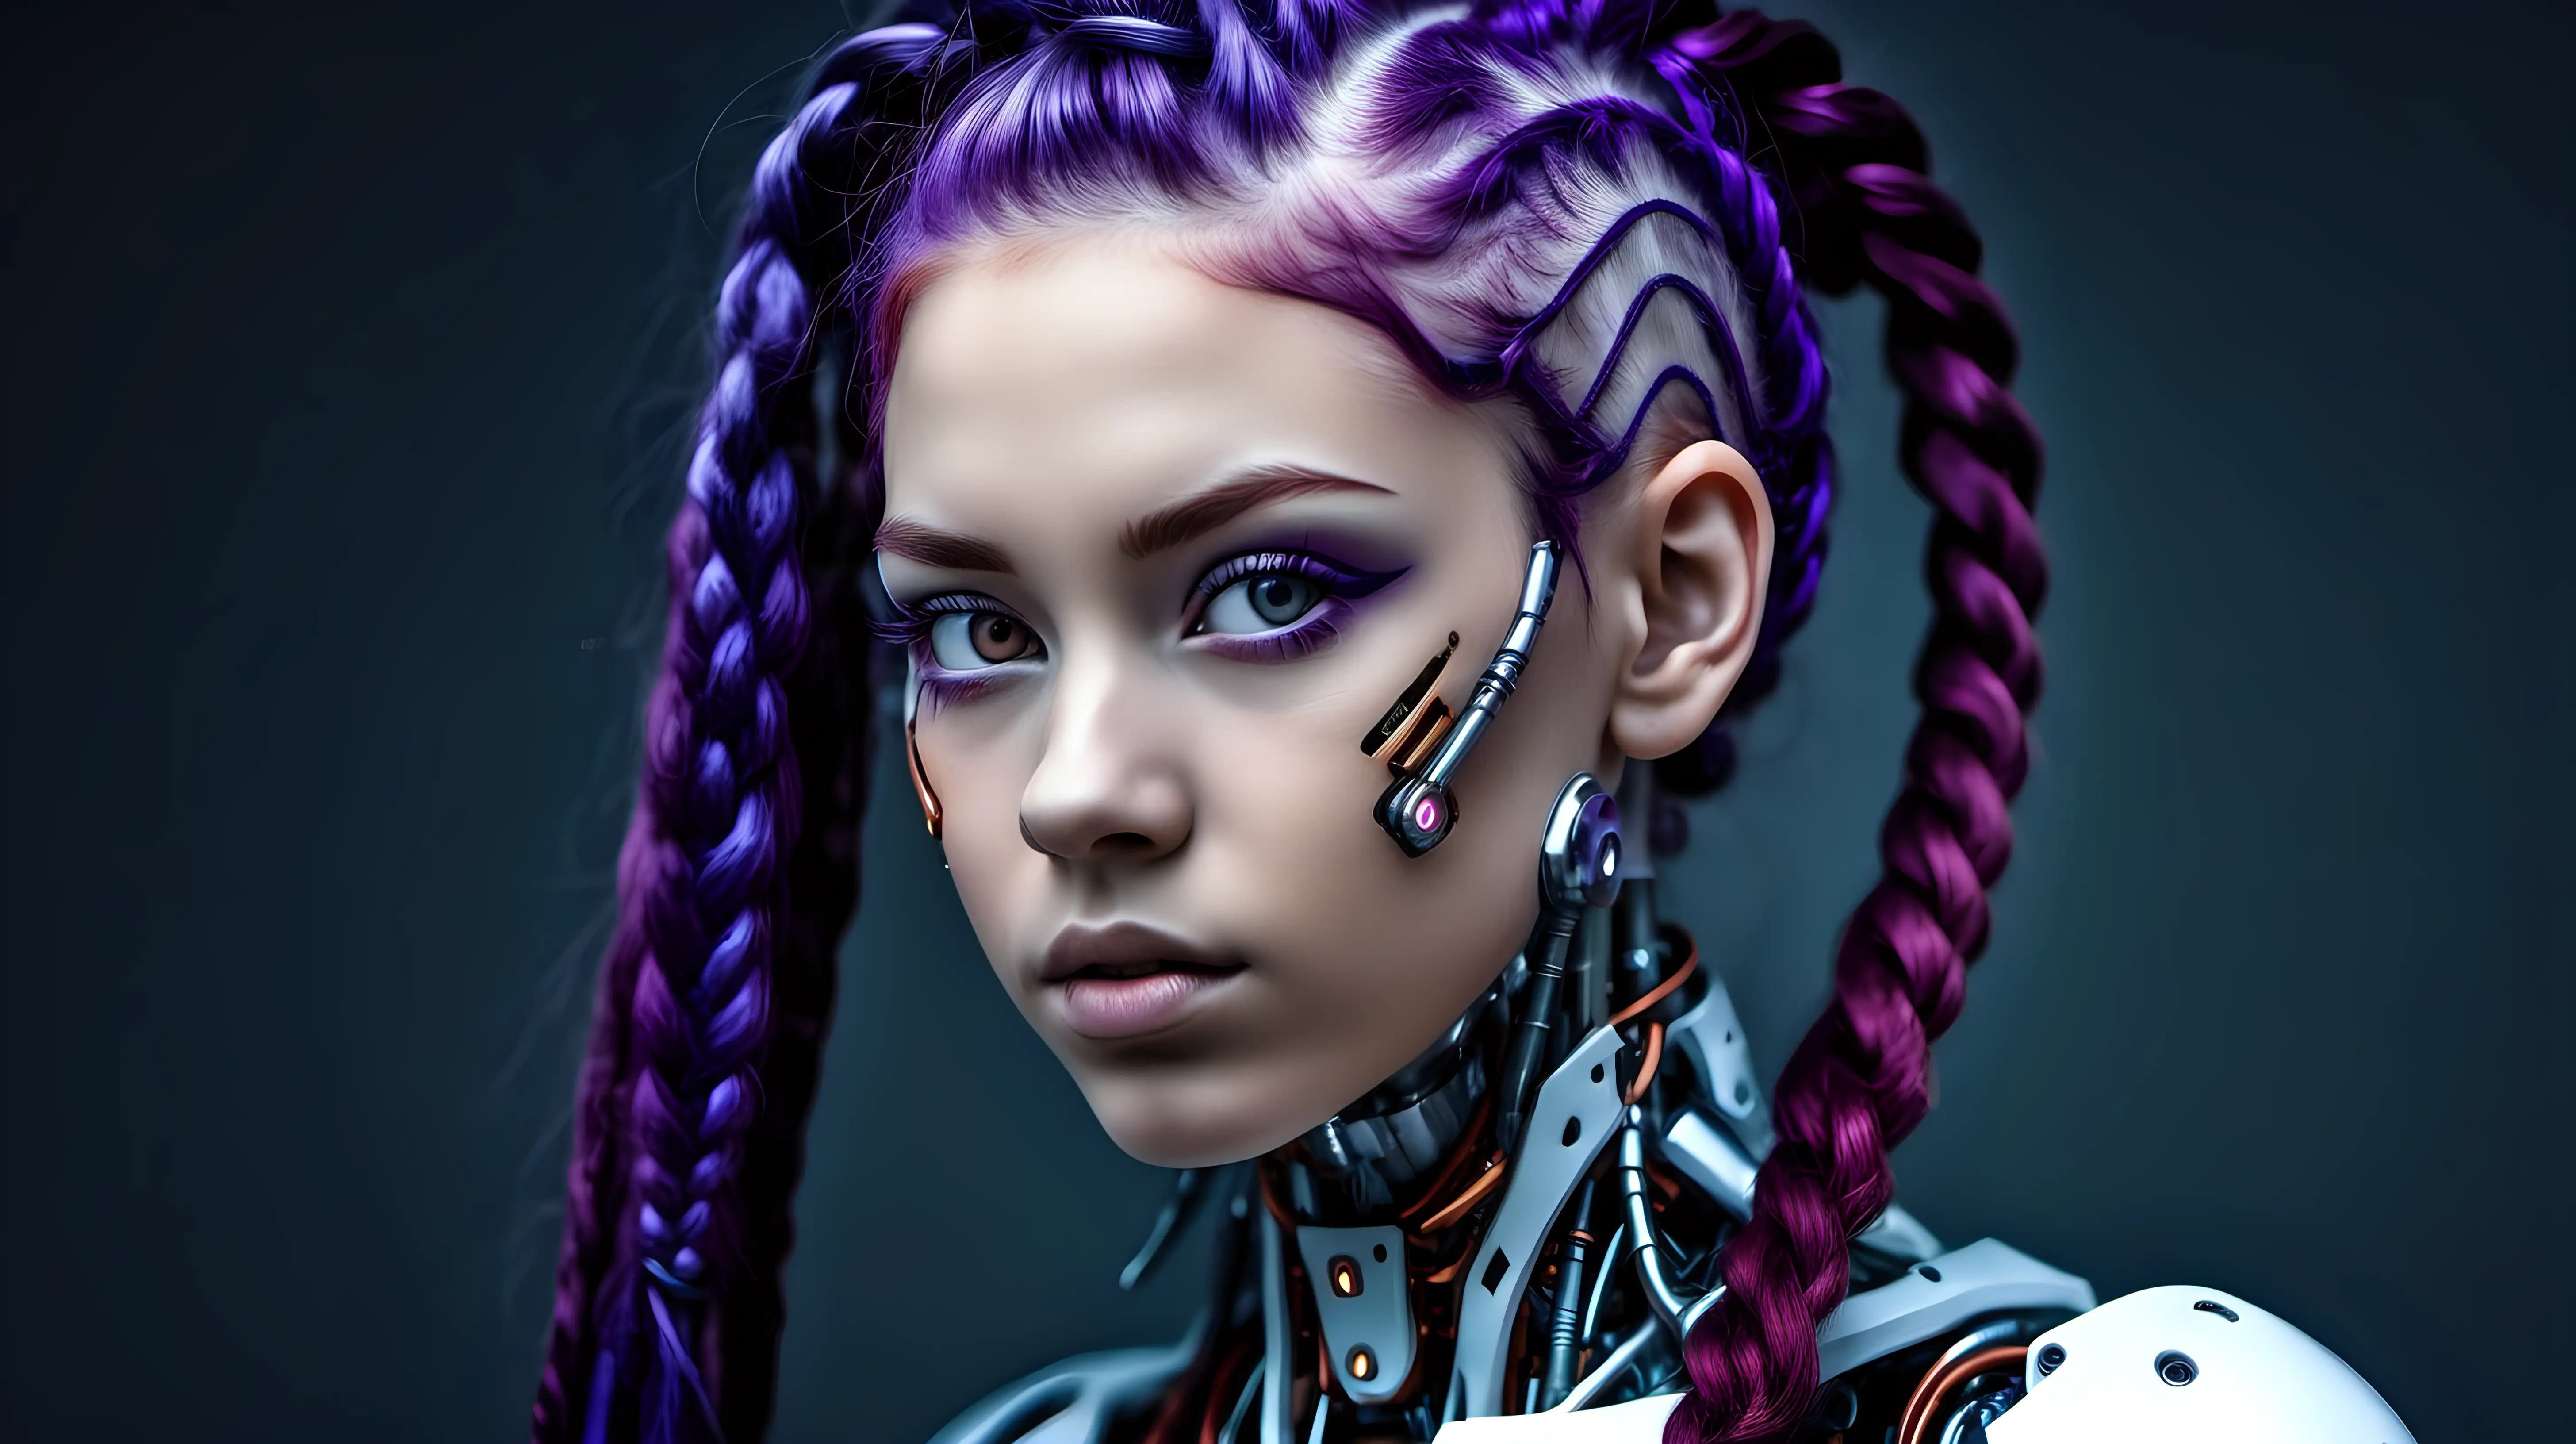 Gorgeous cyborg woman, 18 years old. She has a cyborg face, but she is extremely beautiful. Wild hair, purple braids, red braids. European cyborg woman, white woman.